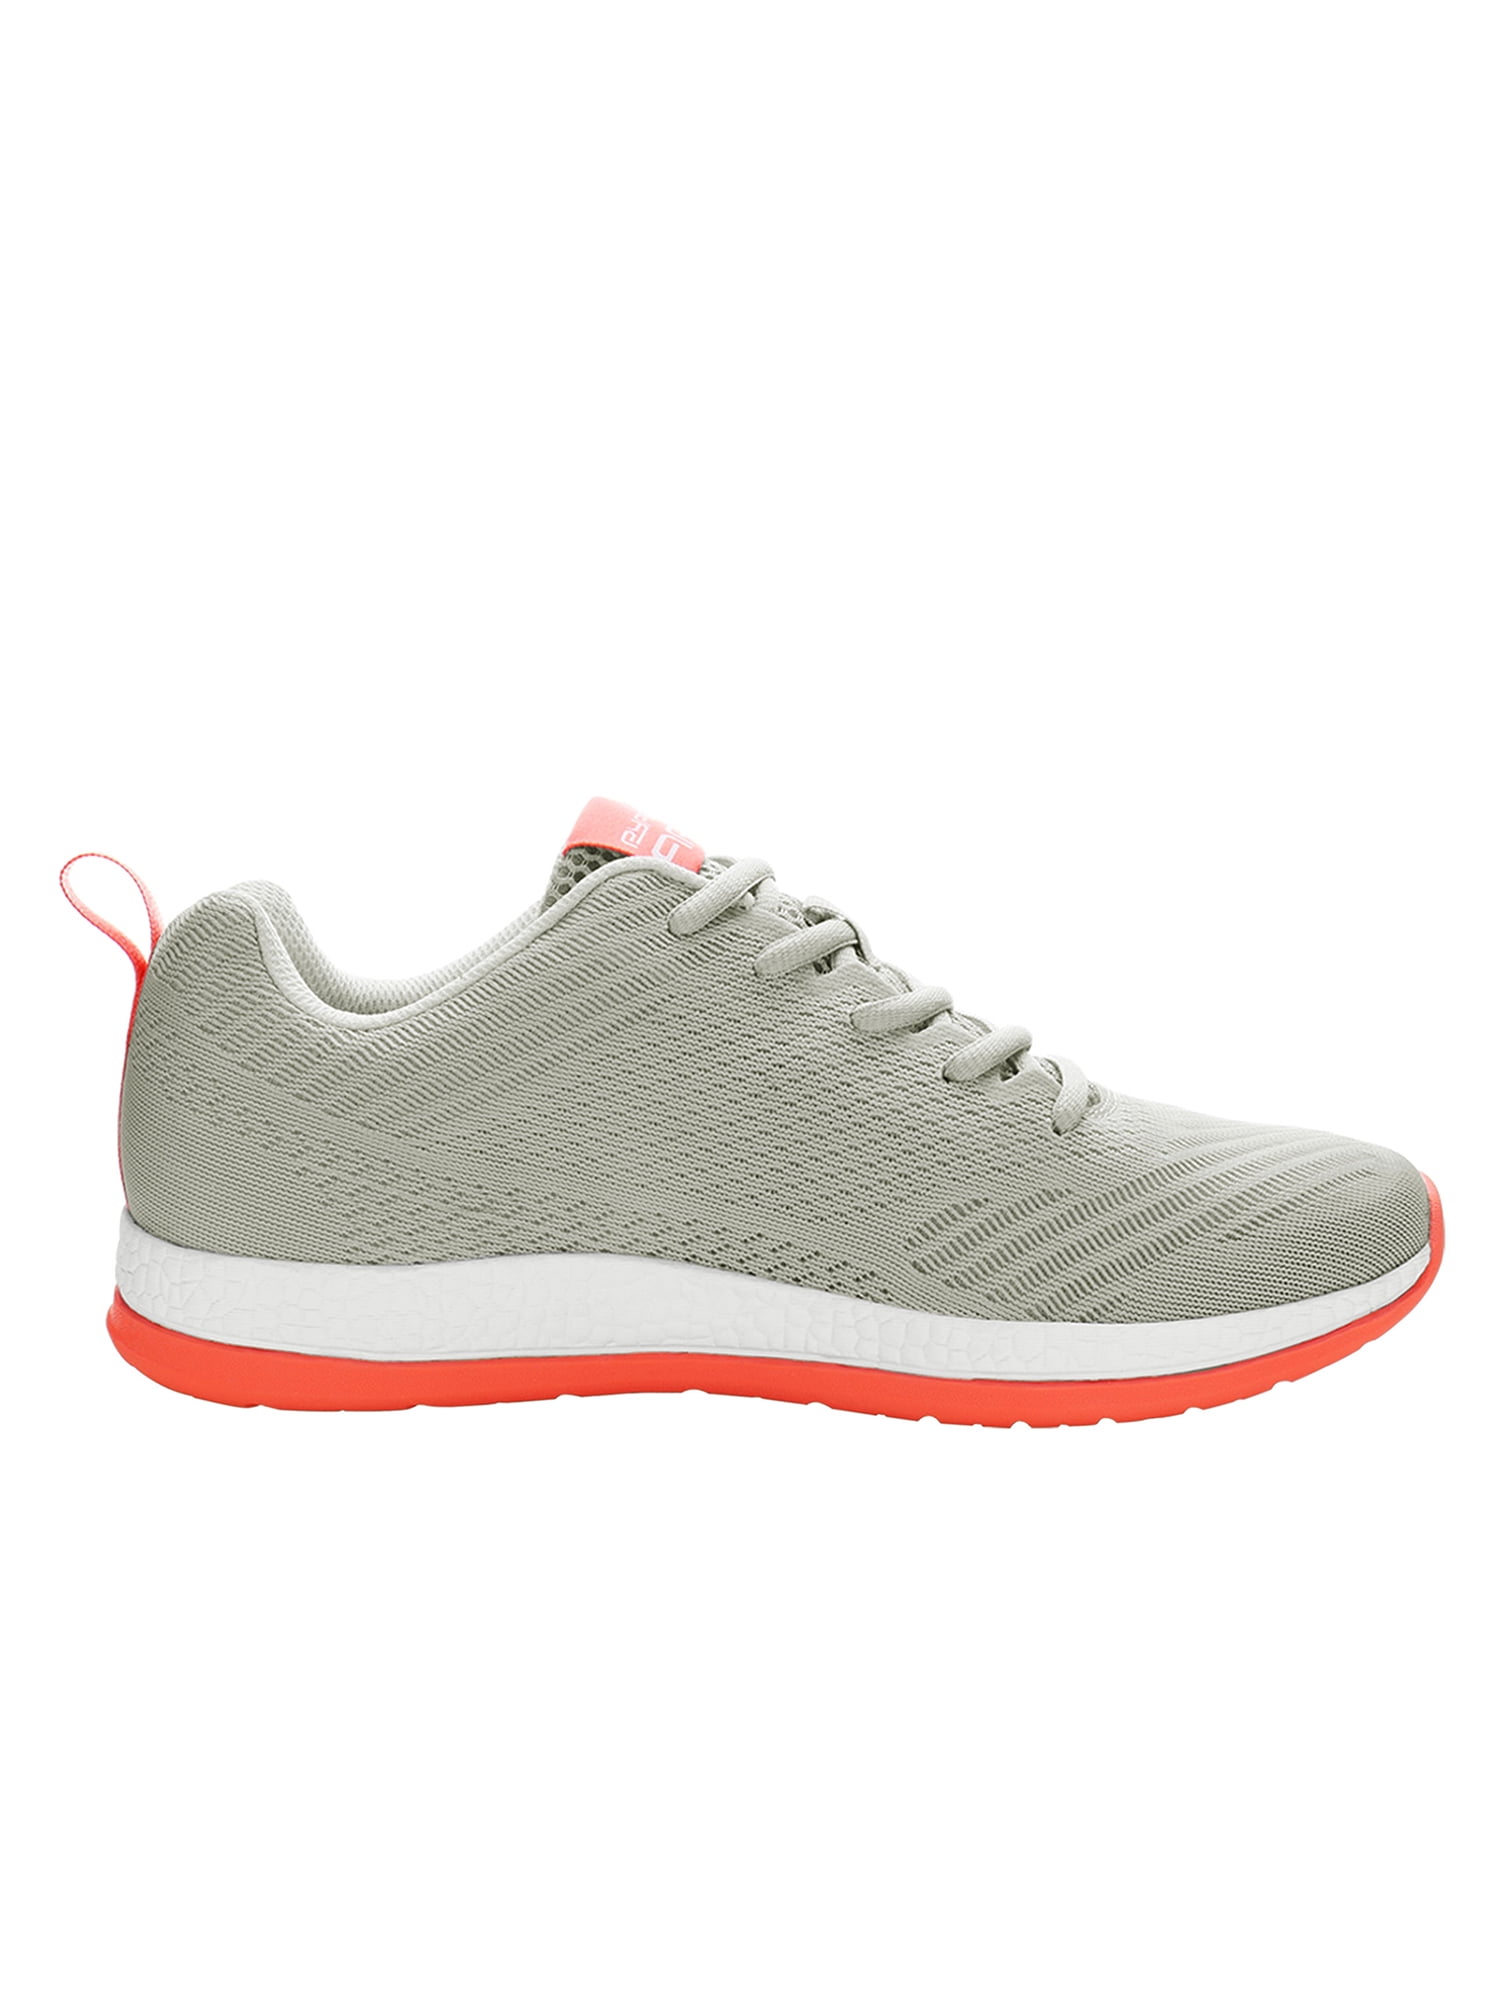 PYPE Women Mesh Contrast Color Round Toe Training Sneakers Gray US 10 ...